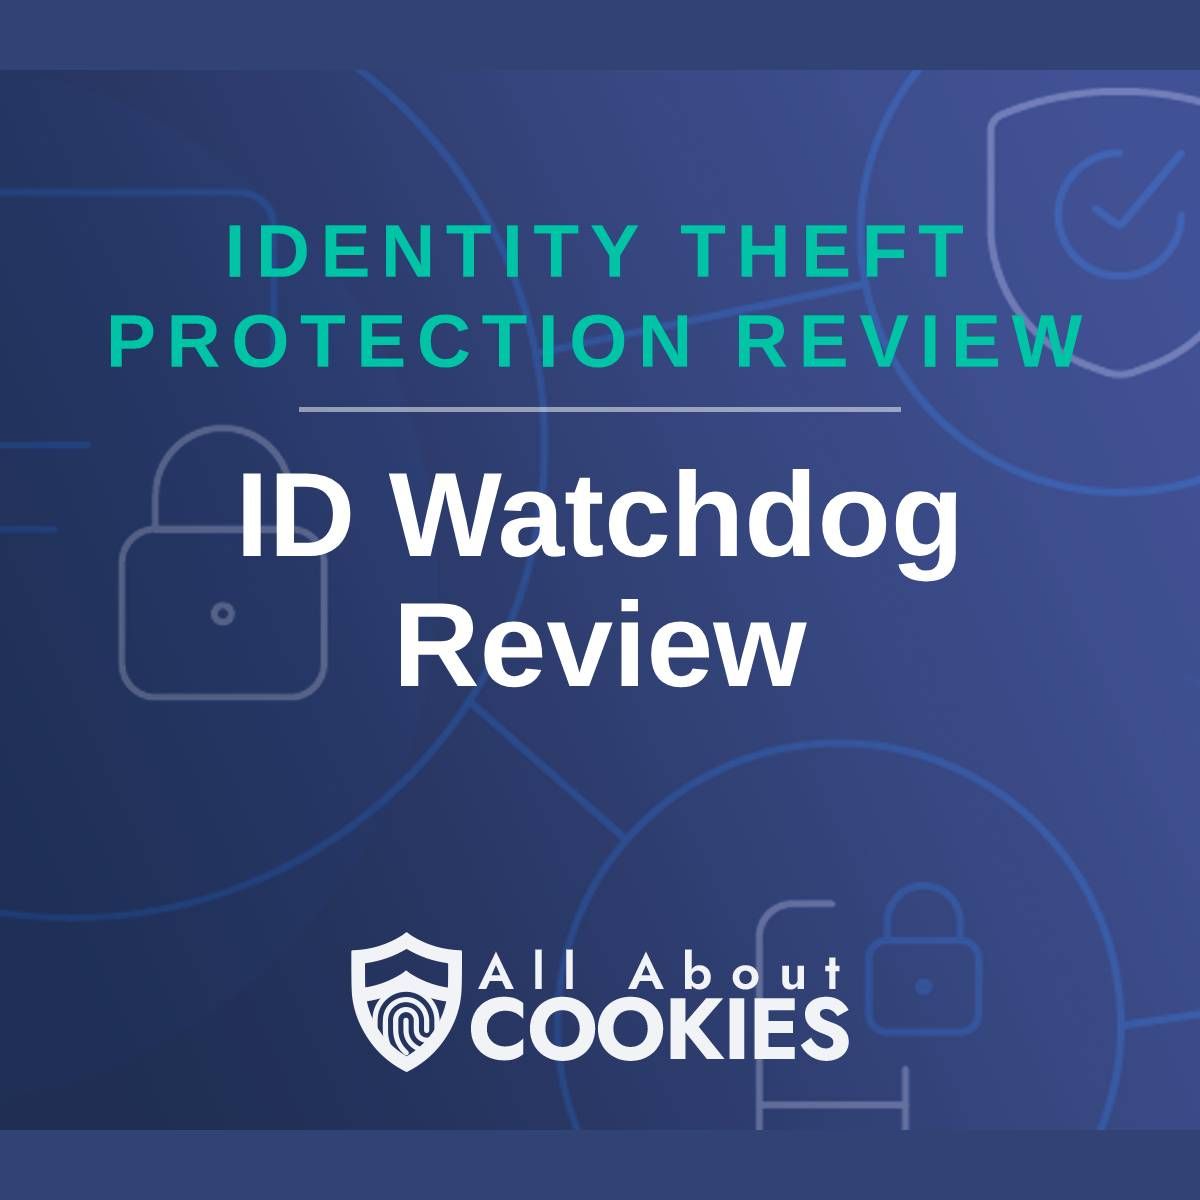 A blue background with images of locks and shields with the text &quot;Identity Theft Protection Review ID Watchdog Review&quot; and the All About Cookies logo. 